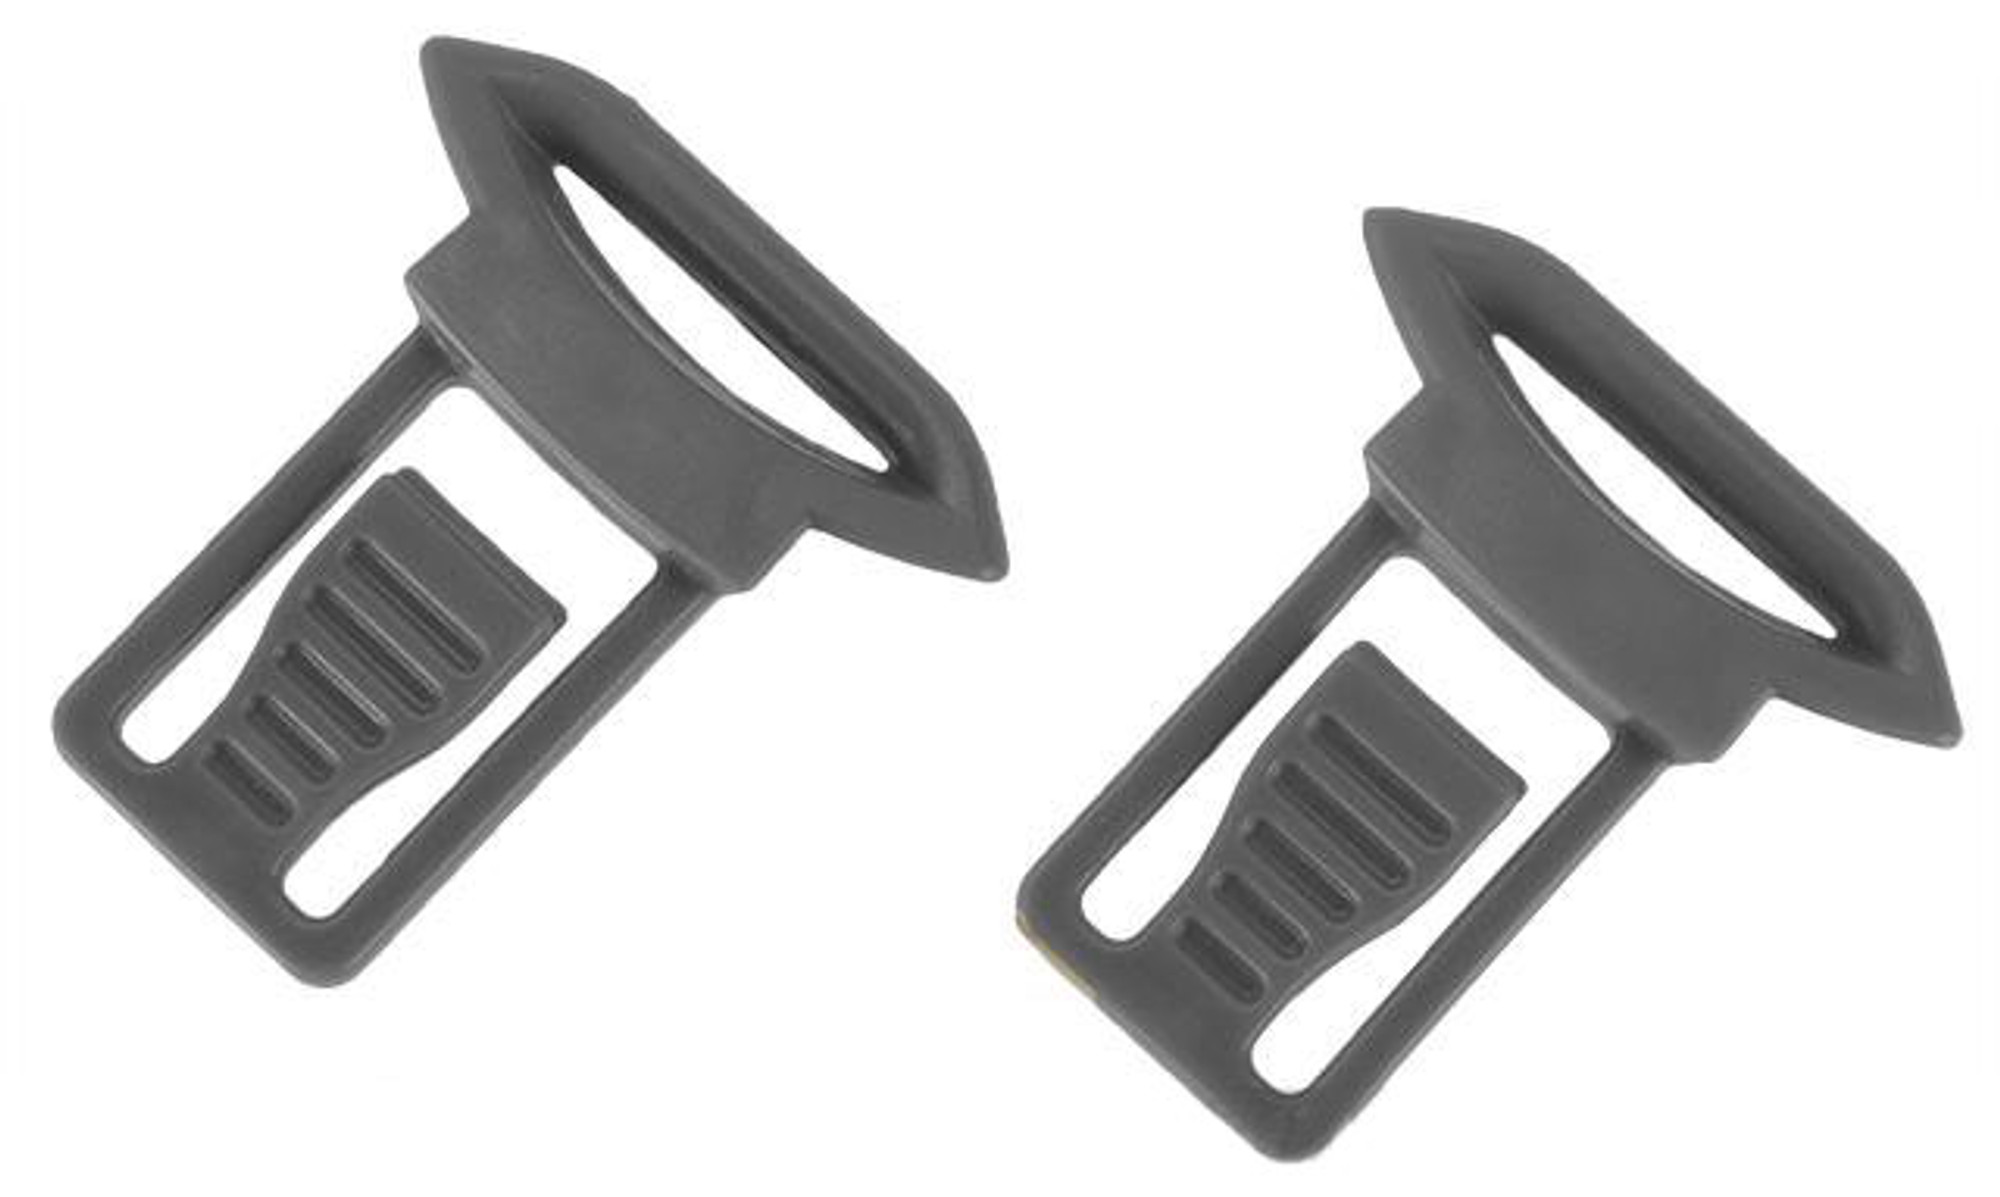 Emerson Replacement Standard Strap Clips for Bump Helmet Rails - Foliage Green